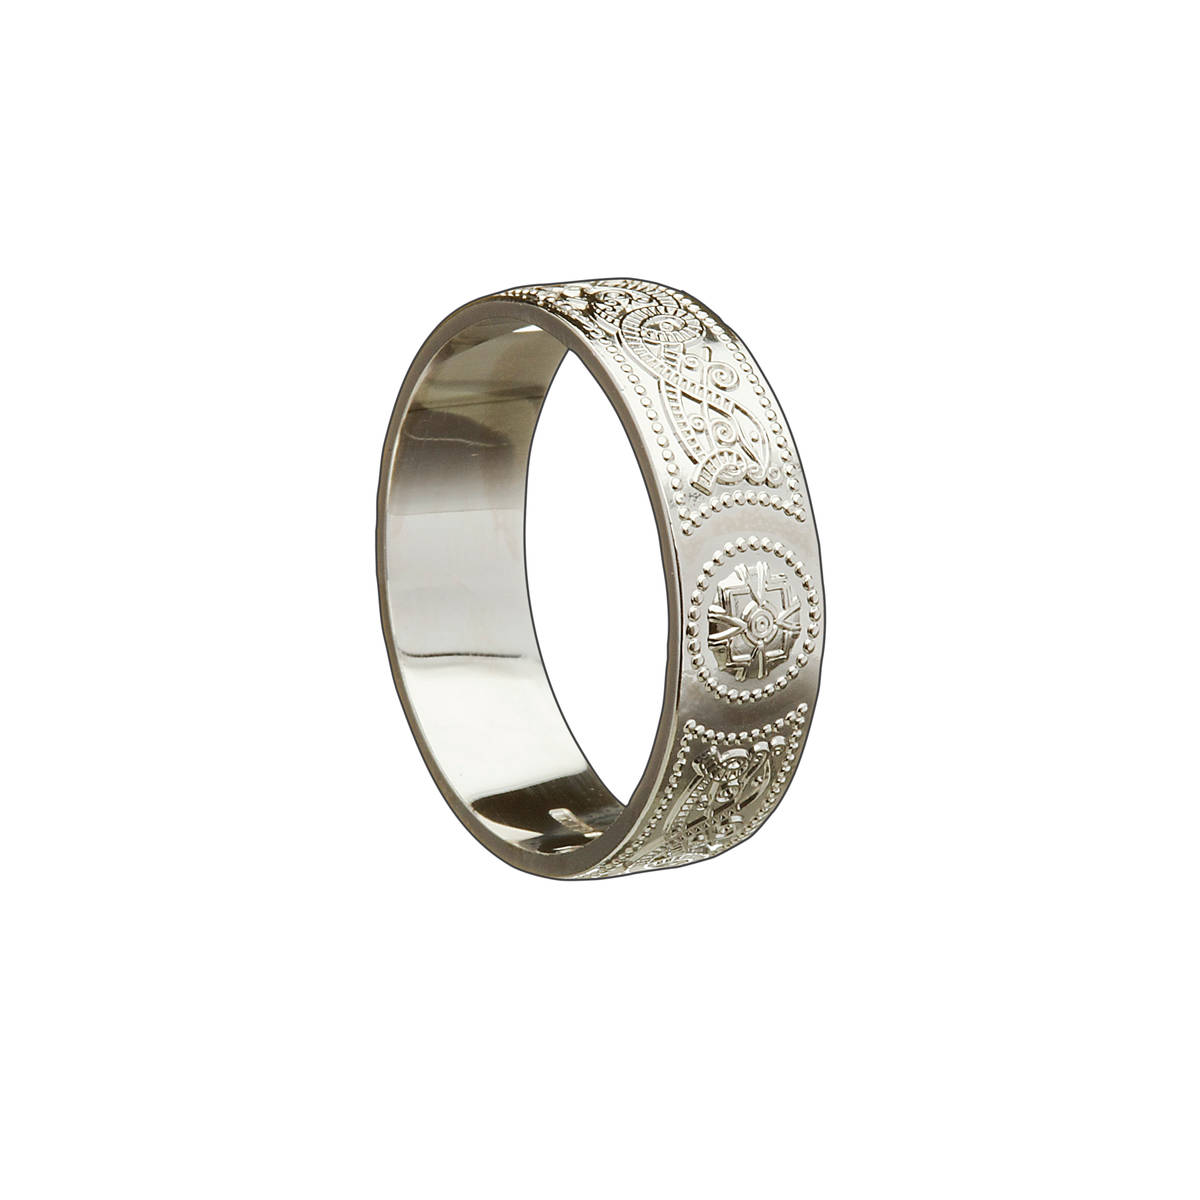 Palladium white man's&nbsp;Arda chalice inspired 6.8&nbsp;mm wide approx.&nbsp;wedding ring.A&nbsp;very practical ring for everyday use.An intricate patterned ring which everyone will admire.